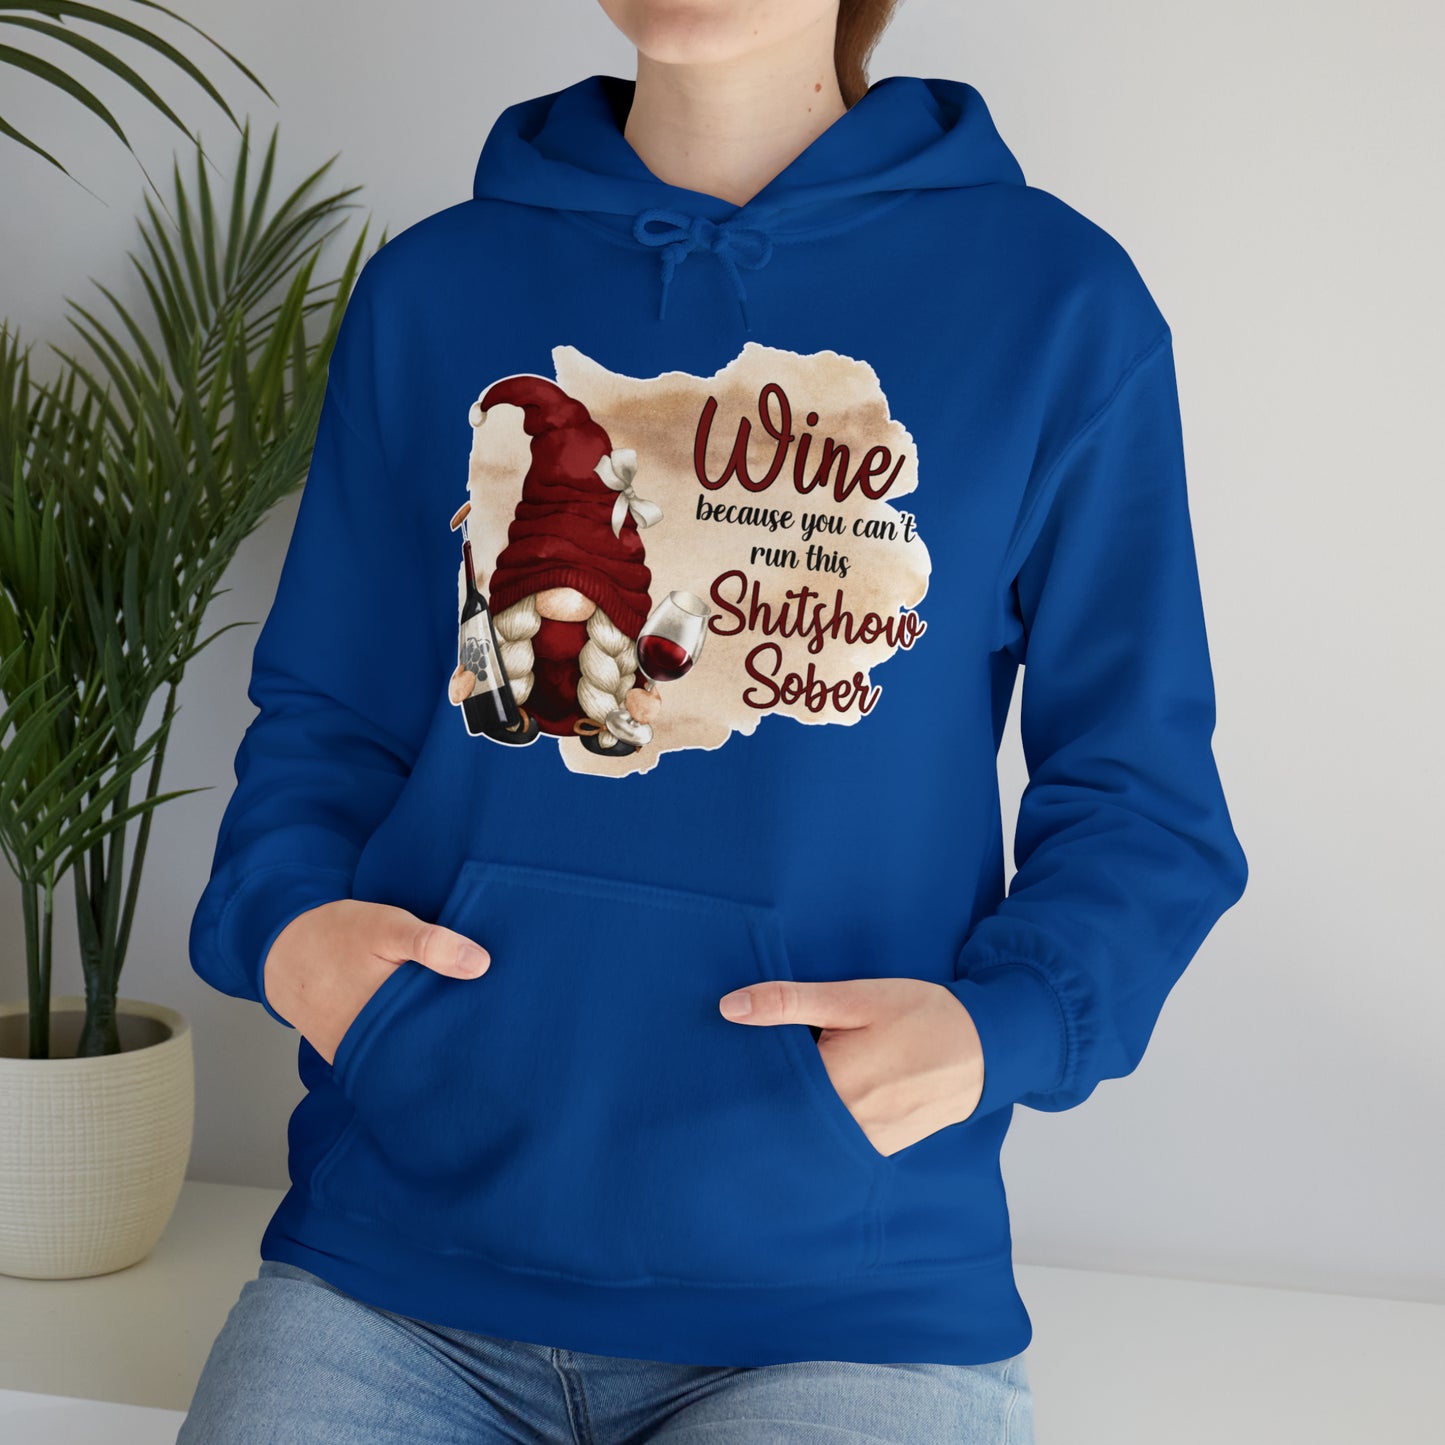 Wine, Because You Can't Run This Shitshow Sober: Unisex Heavy Blend™ Hooded Sweatshirt